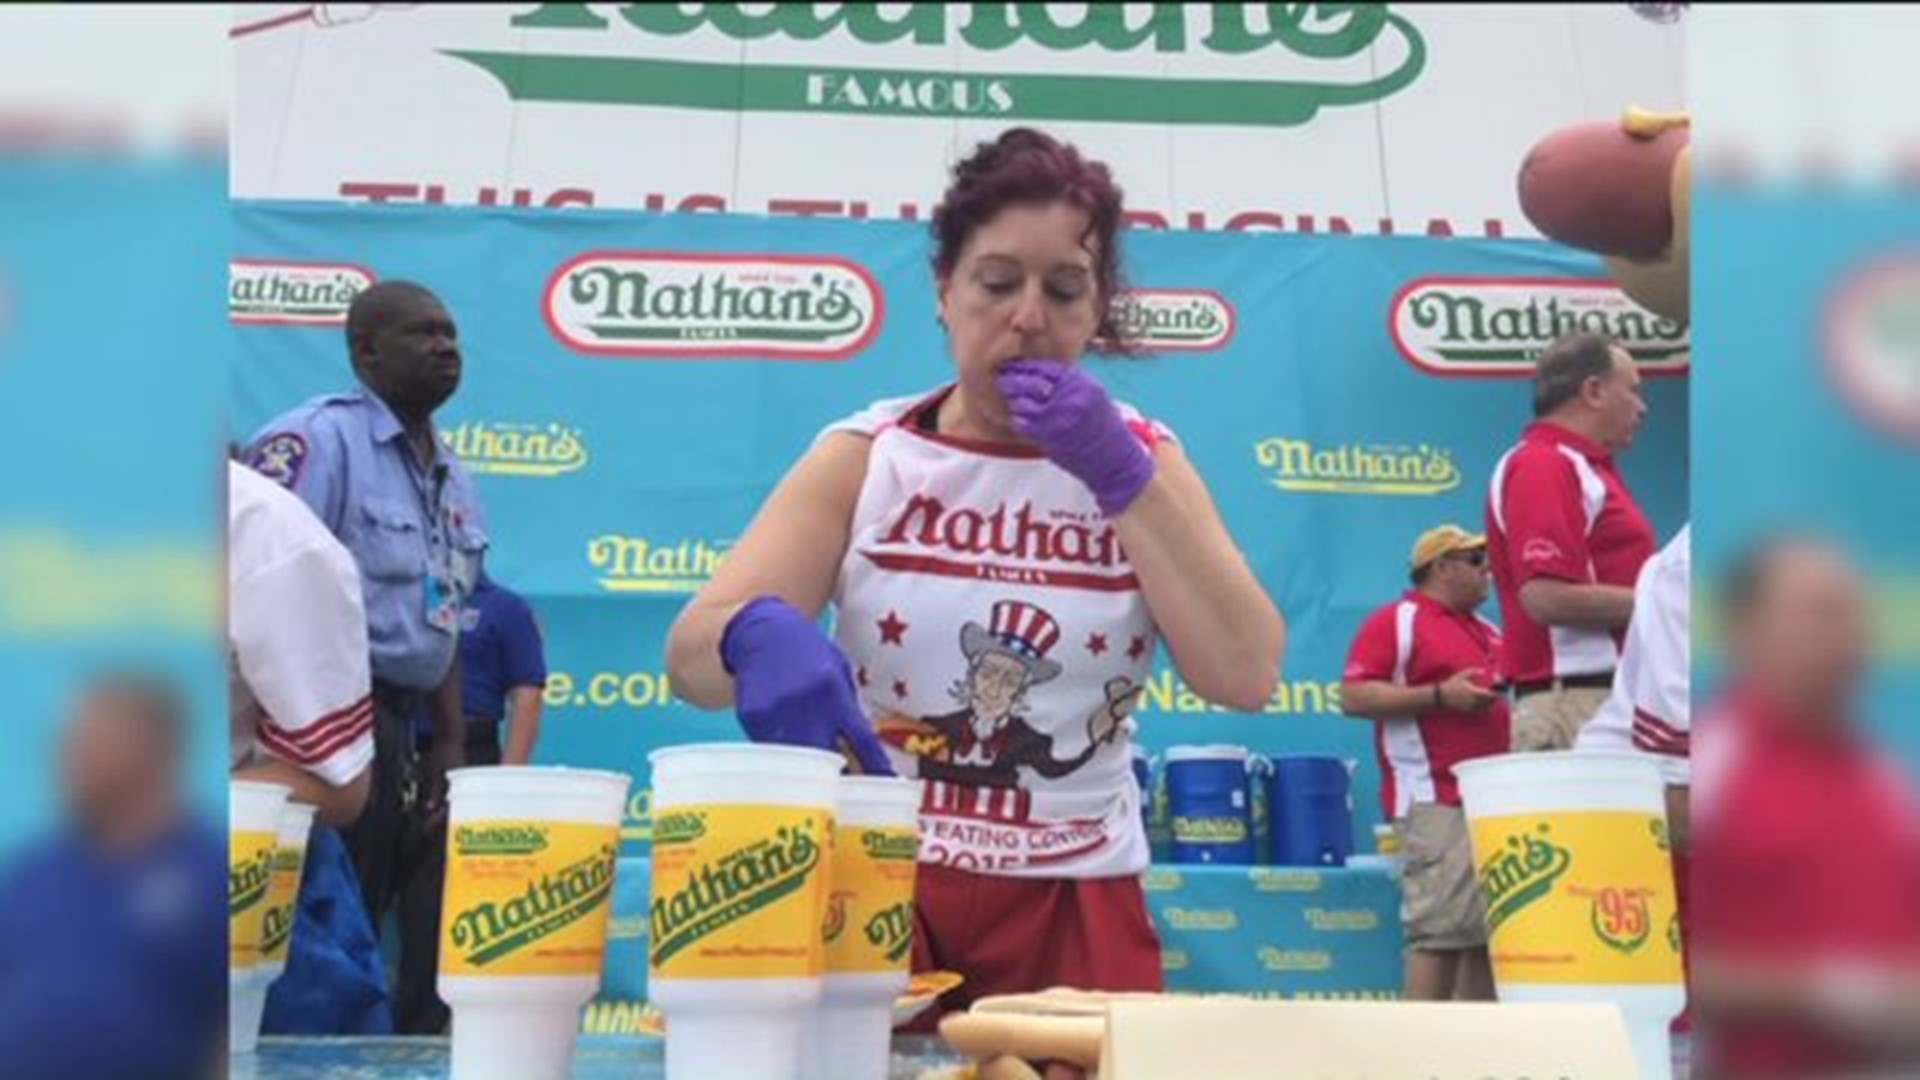 Monroe County Woman Chows Down at Coney Island